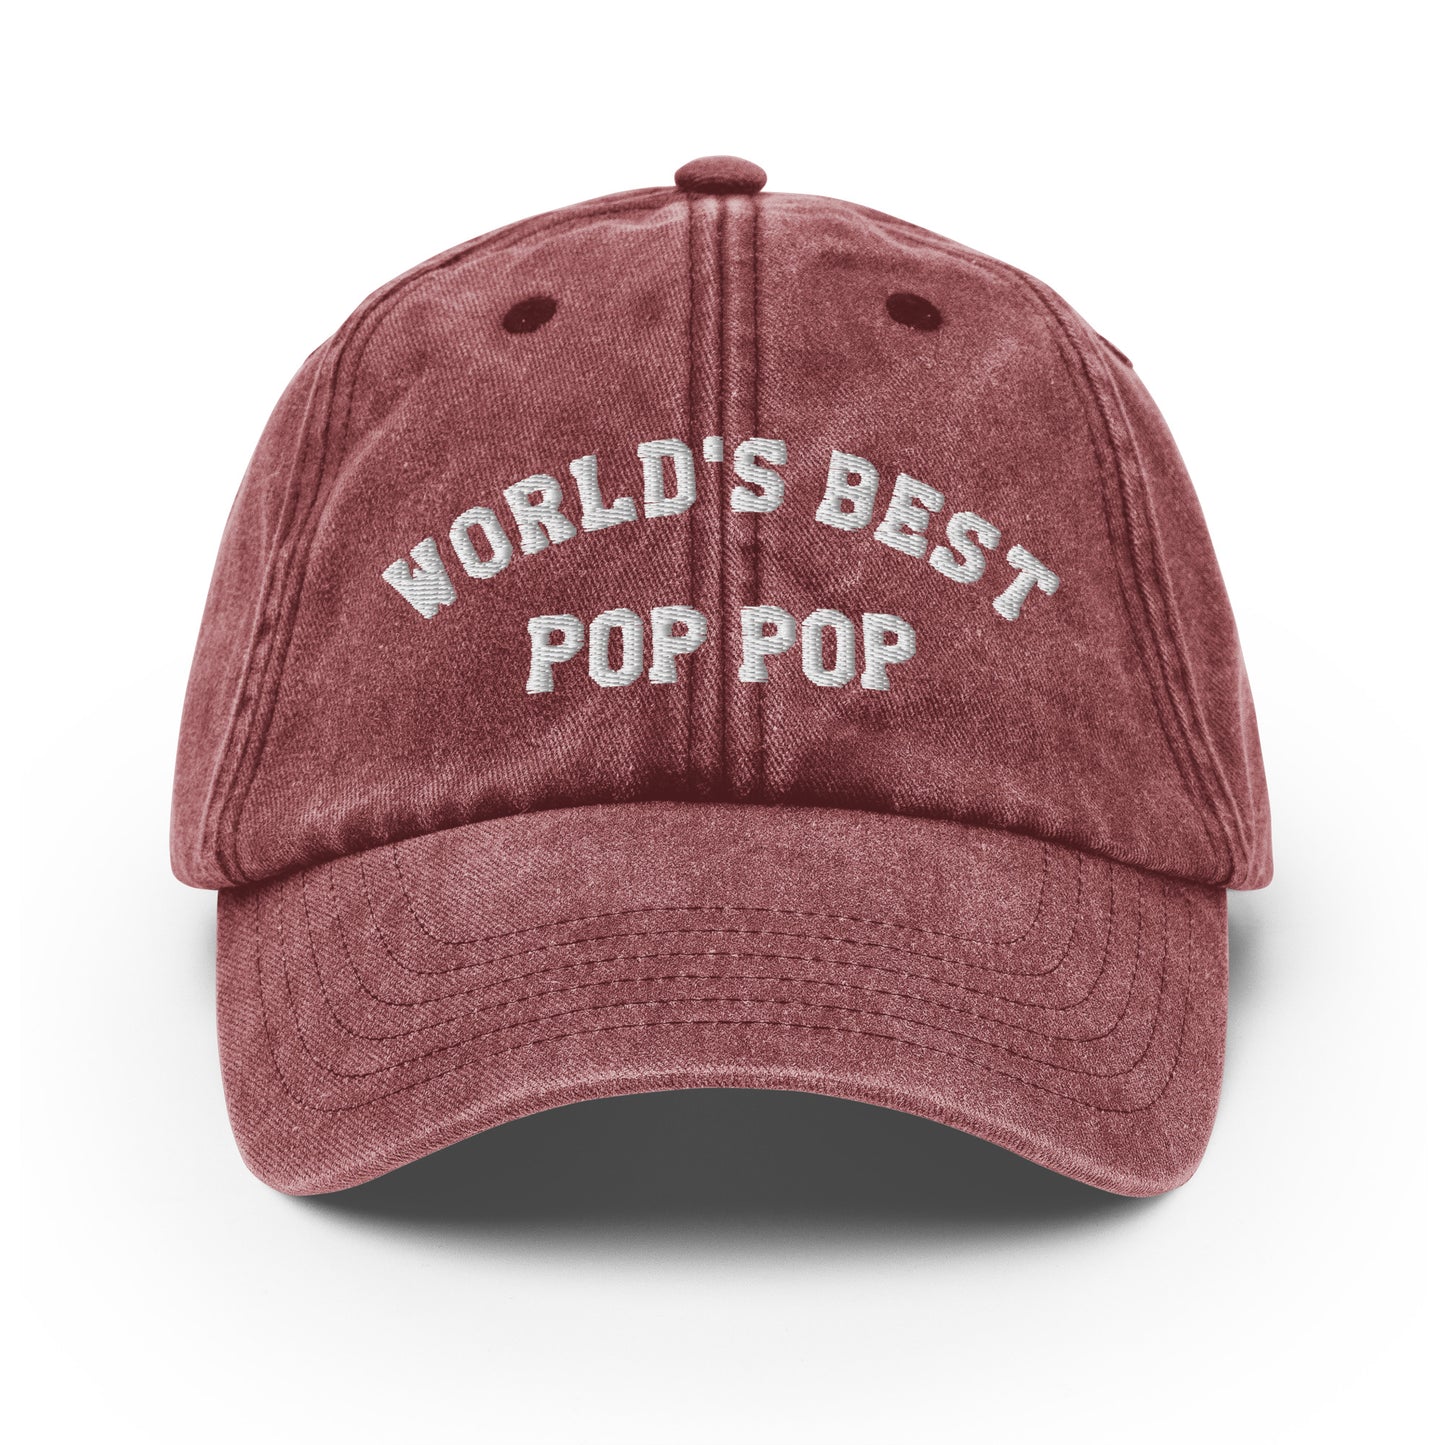 World's Best Pop Pop Vintage Baseball Hat, Dad Cap Trucker Men Grandfather Grandpa Embroidery Embroidered Father's Day Gift Starcove Fashion